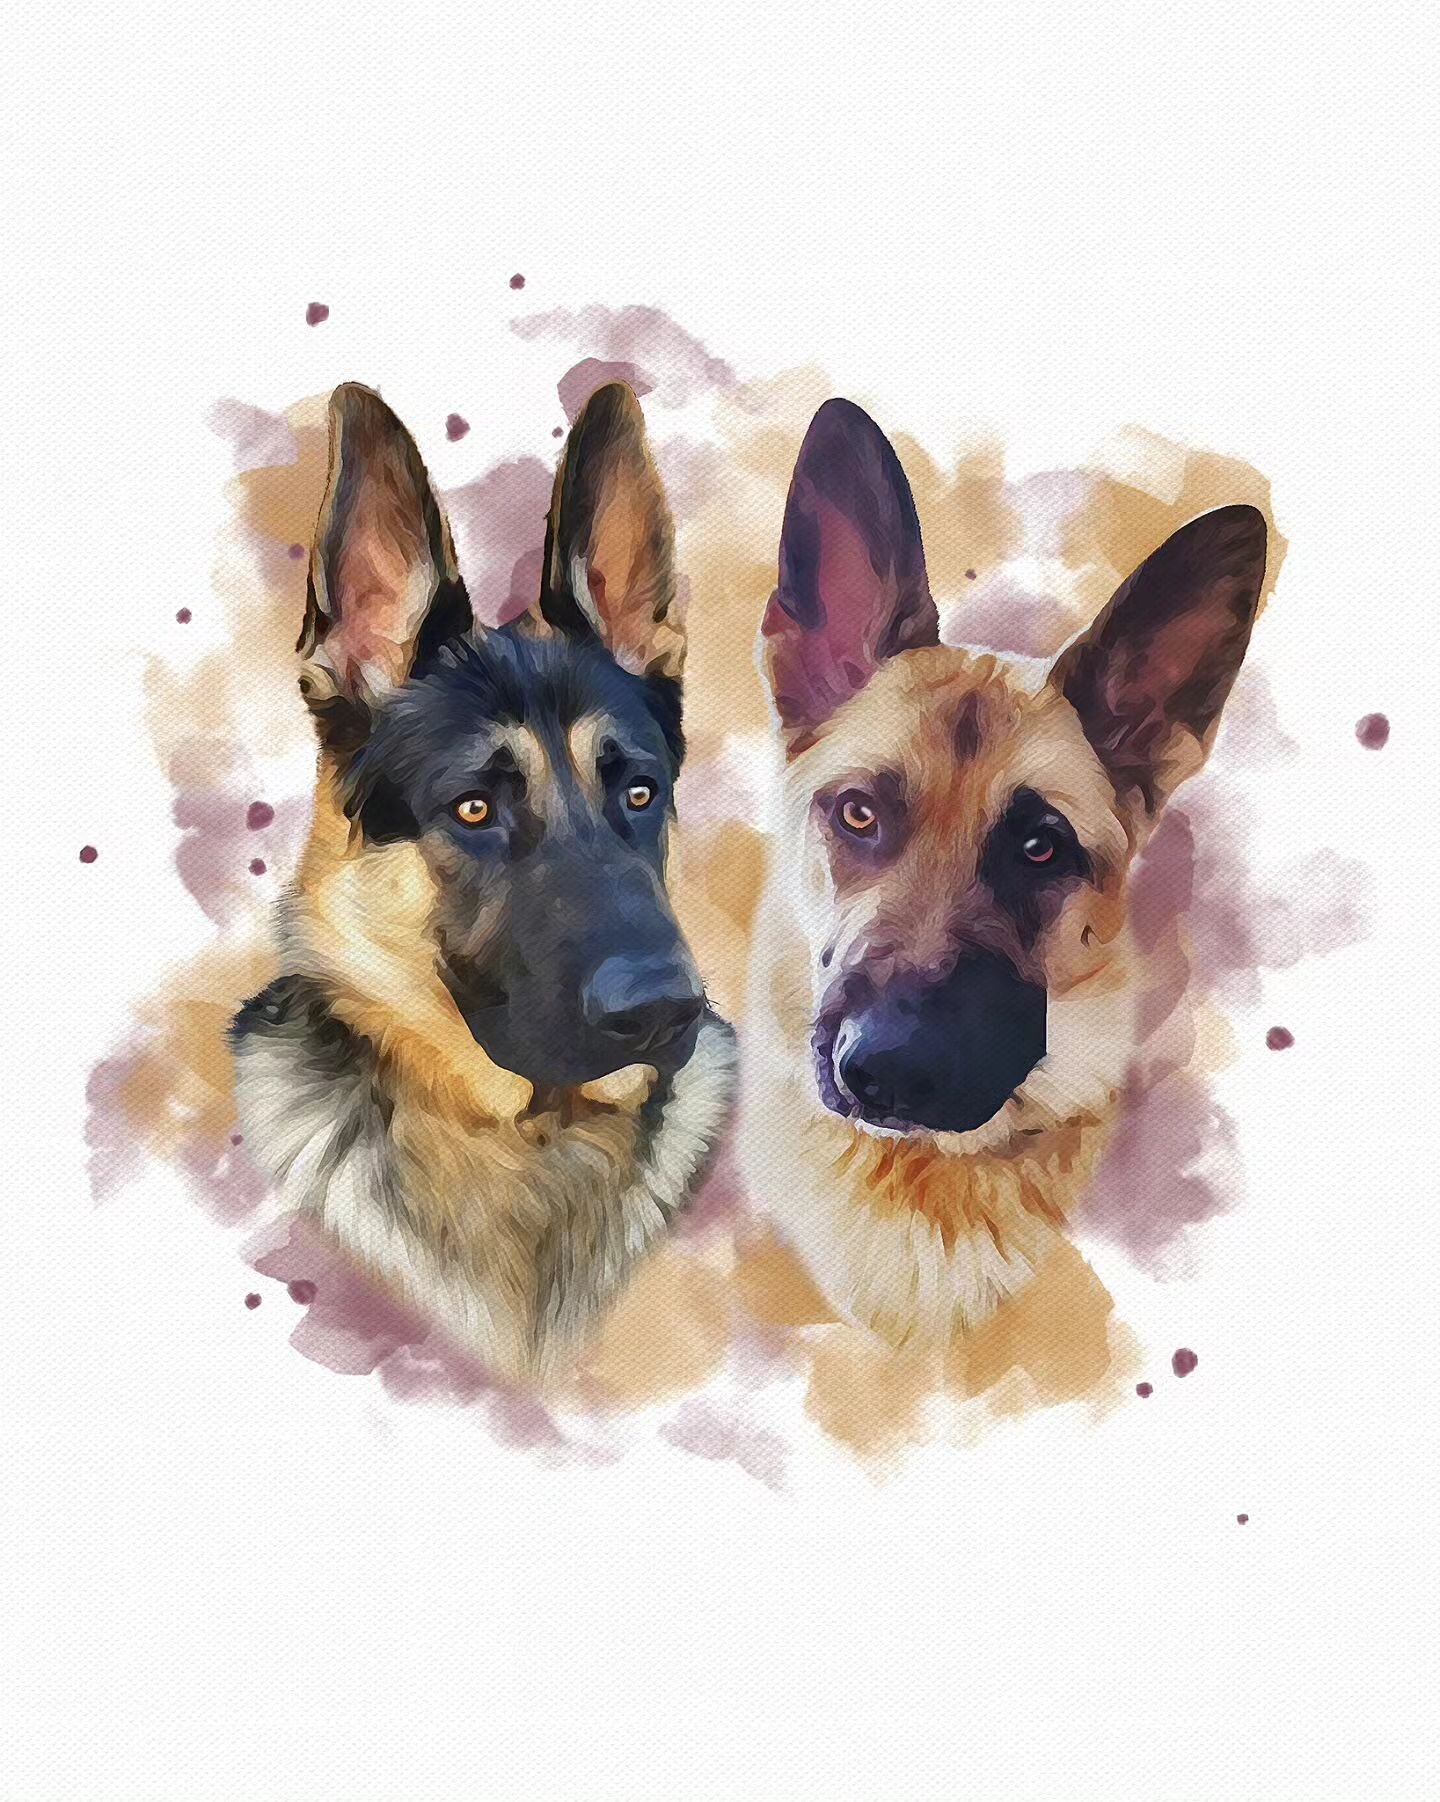 💛 LOKI &amp; KYIA 🩷

Have you ever seen a more perfect, good looking pair!? 😱 Those ears really are something else! 😍

These two are the perfect example of how a portrait can come together from two separate photos. These pups love to make it diff